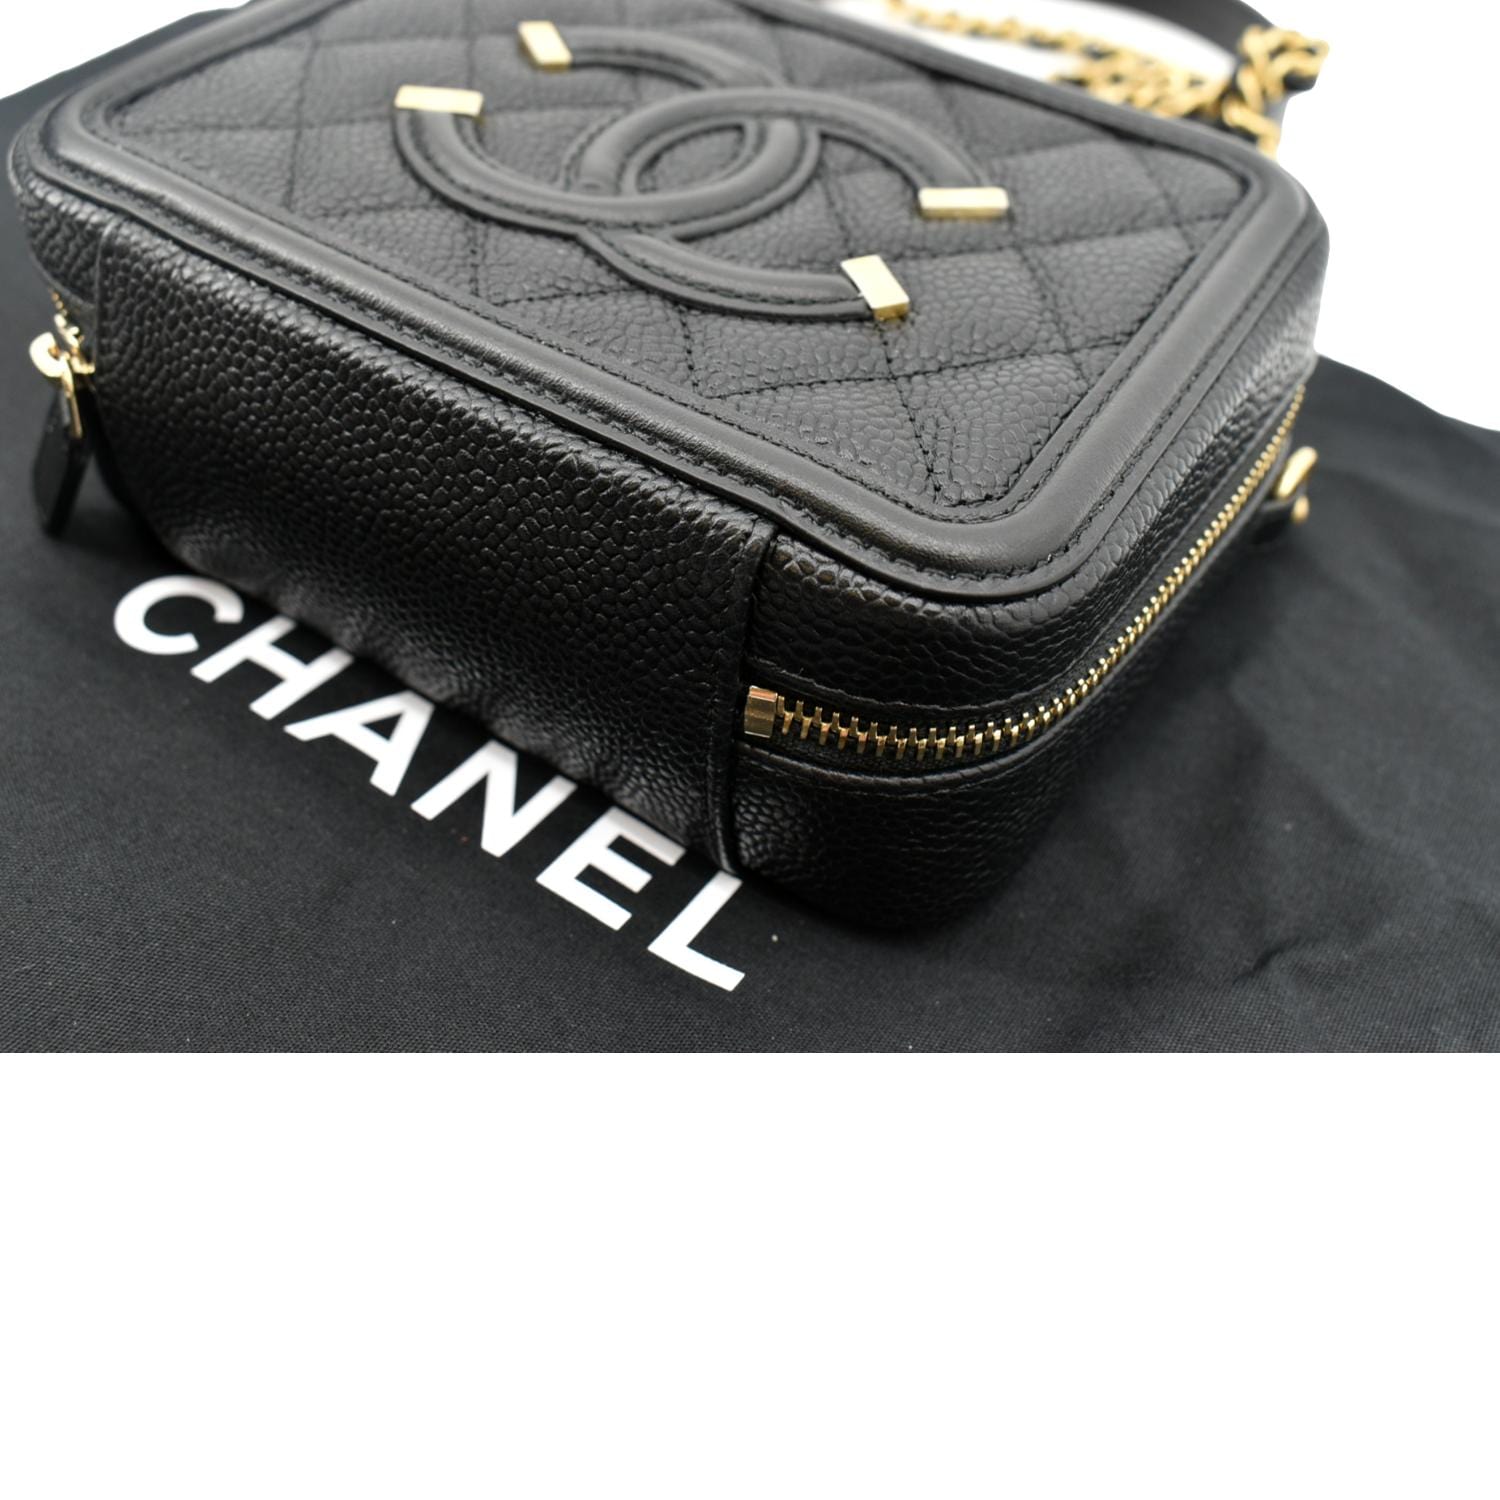 Chanel Caviar Quilted CC North South Filigree Vanity Case Pink